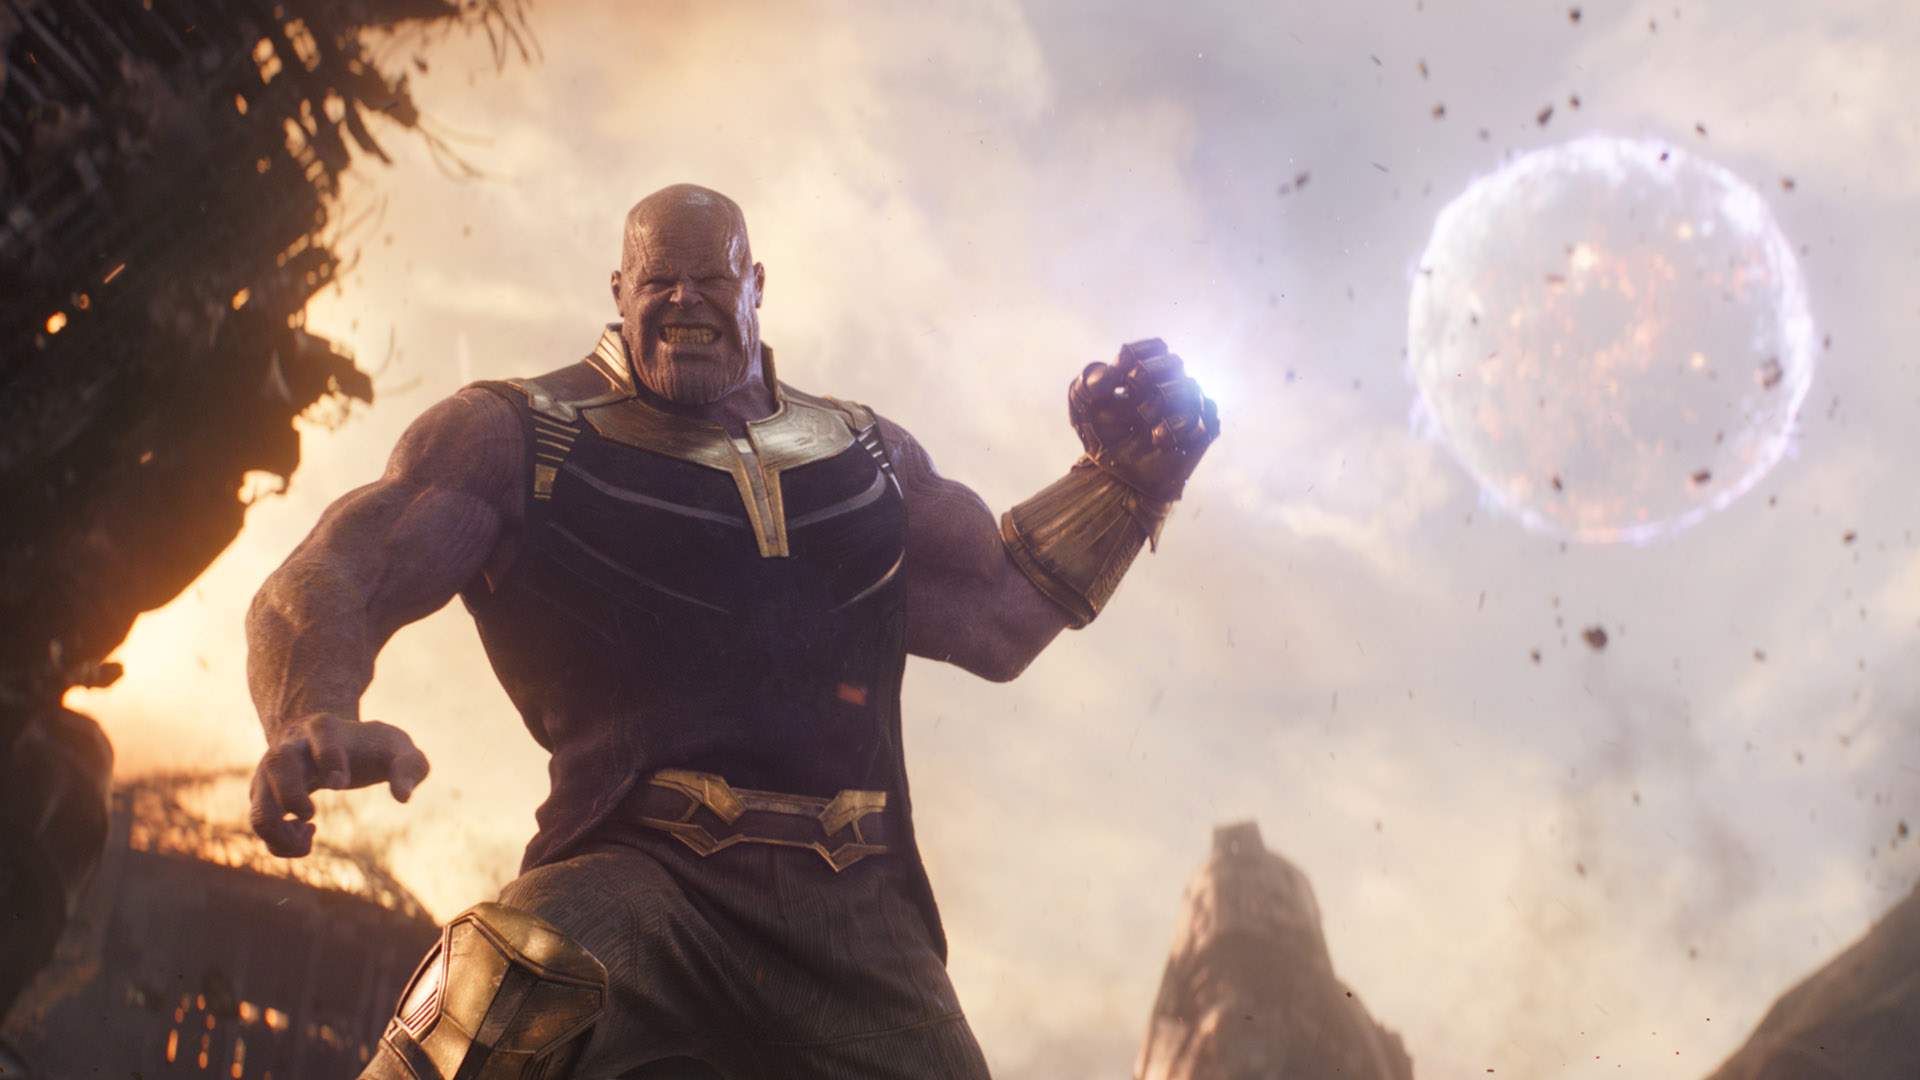 You Can Unleash Thanos' Gauntlet on Google's Search Results Right Now